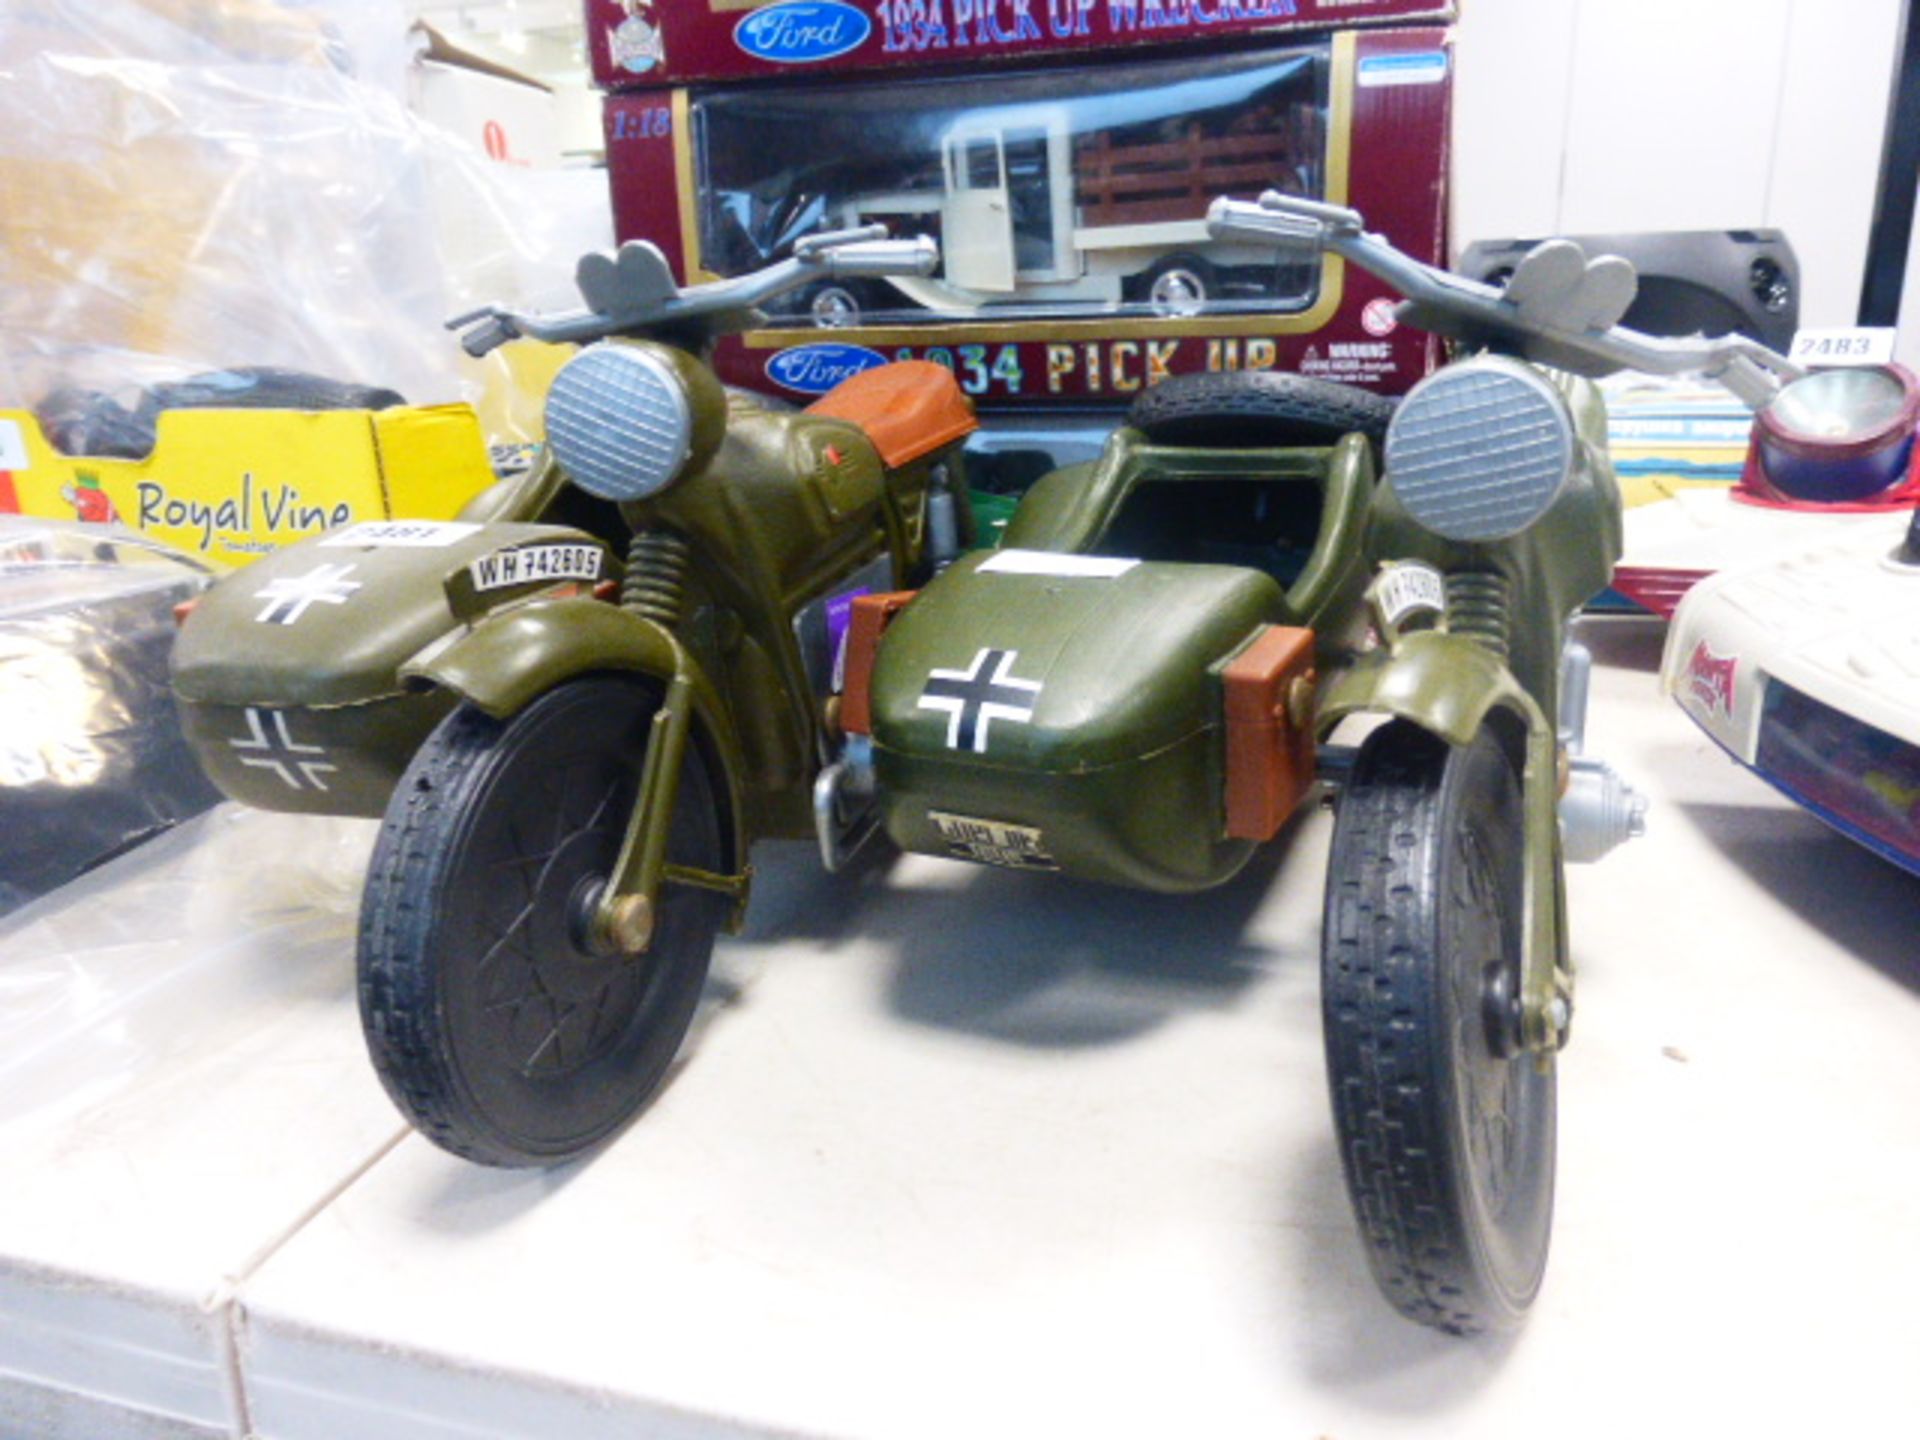 Cherilea action man style German military motorcycle and sidecar and another - Image 2 of 2